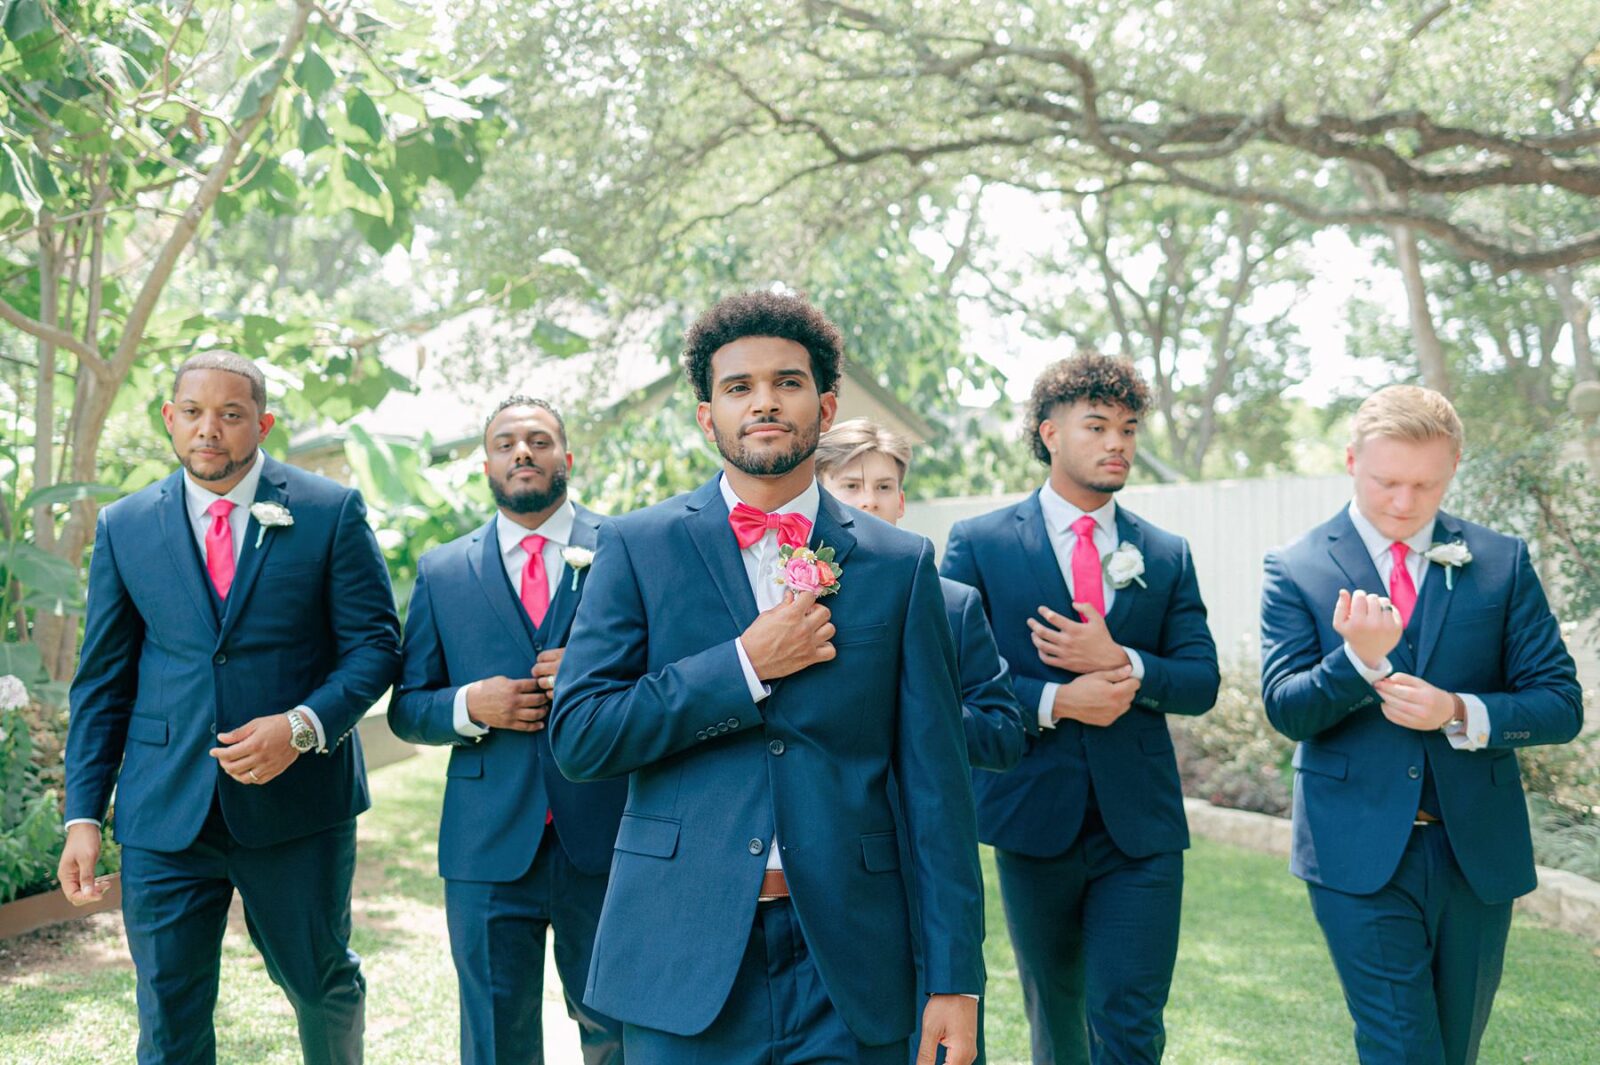 groom and groomsman portraits, hot pink groomsman details, Austin Wedding at Hummingbird House, with wedding photos by Tara Lyons Photography. Other vendors: Mistique Makeup, Cana Events, Twin Flame Events, Simply Chic Event Rentals, Live Oak Photo Booth